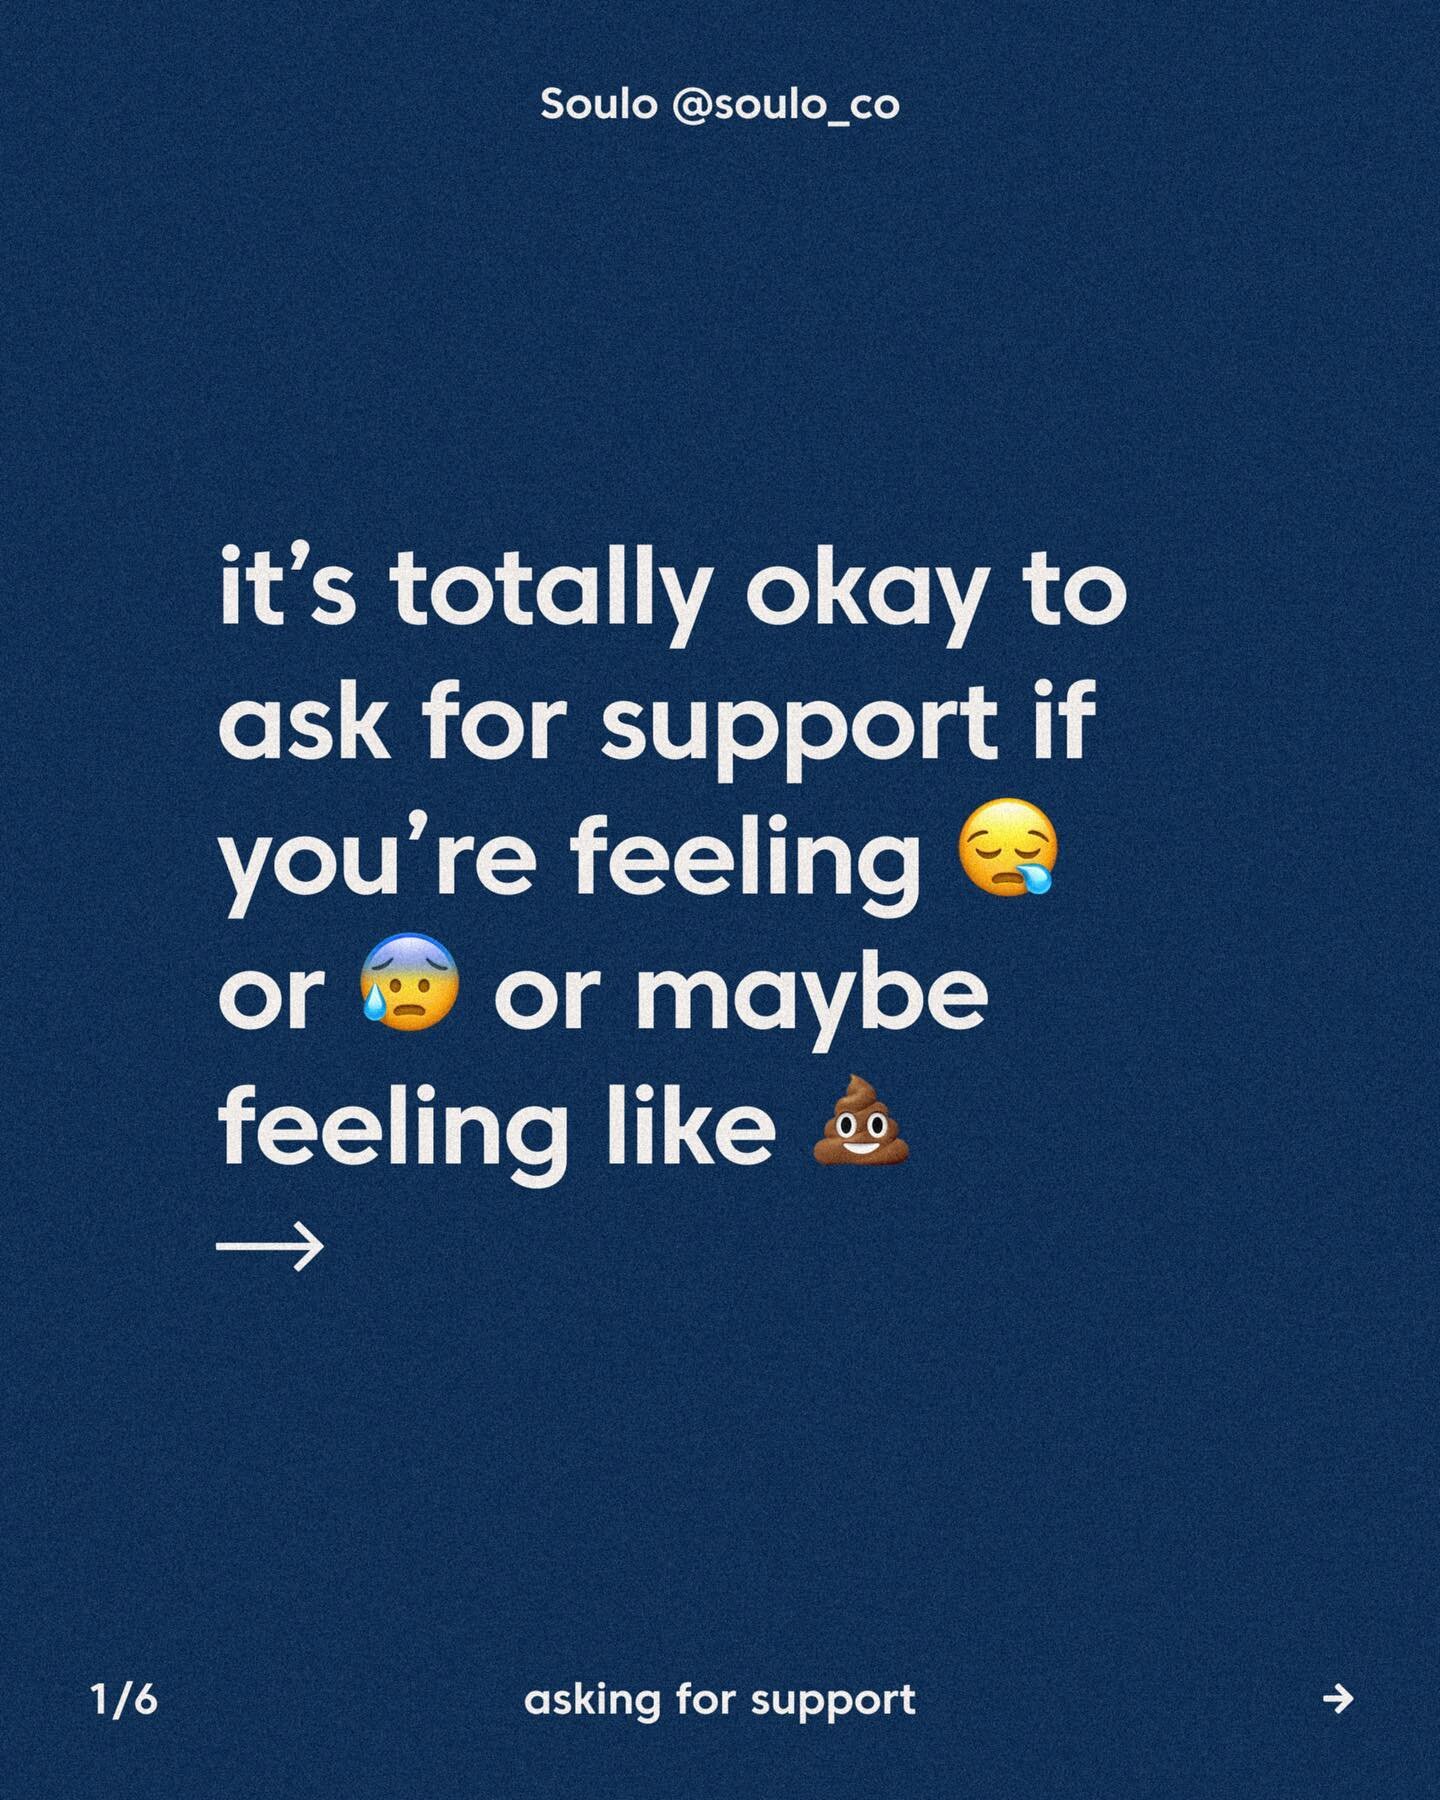 Just a reminder, you&rsquo;re not asking for &ldquo;too much&rdquo;. You aren&rsquo;t expected to go through life alone. ❤️ Here&rsquo;s how to ask for help when you&rsquo;re having a hard day, need to talk through something, or just have someone lis